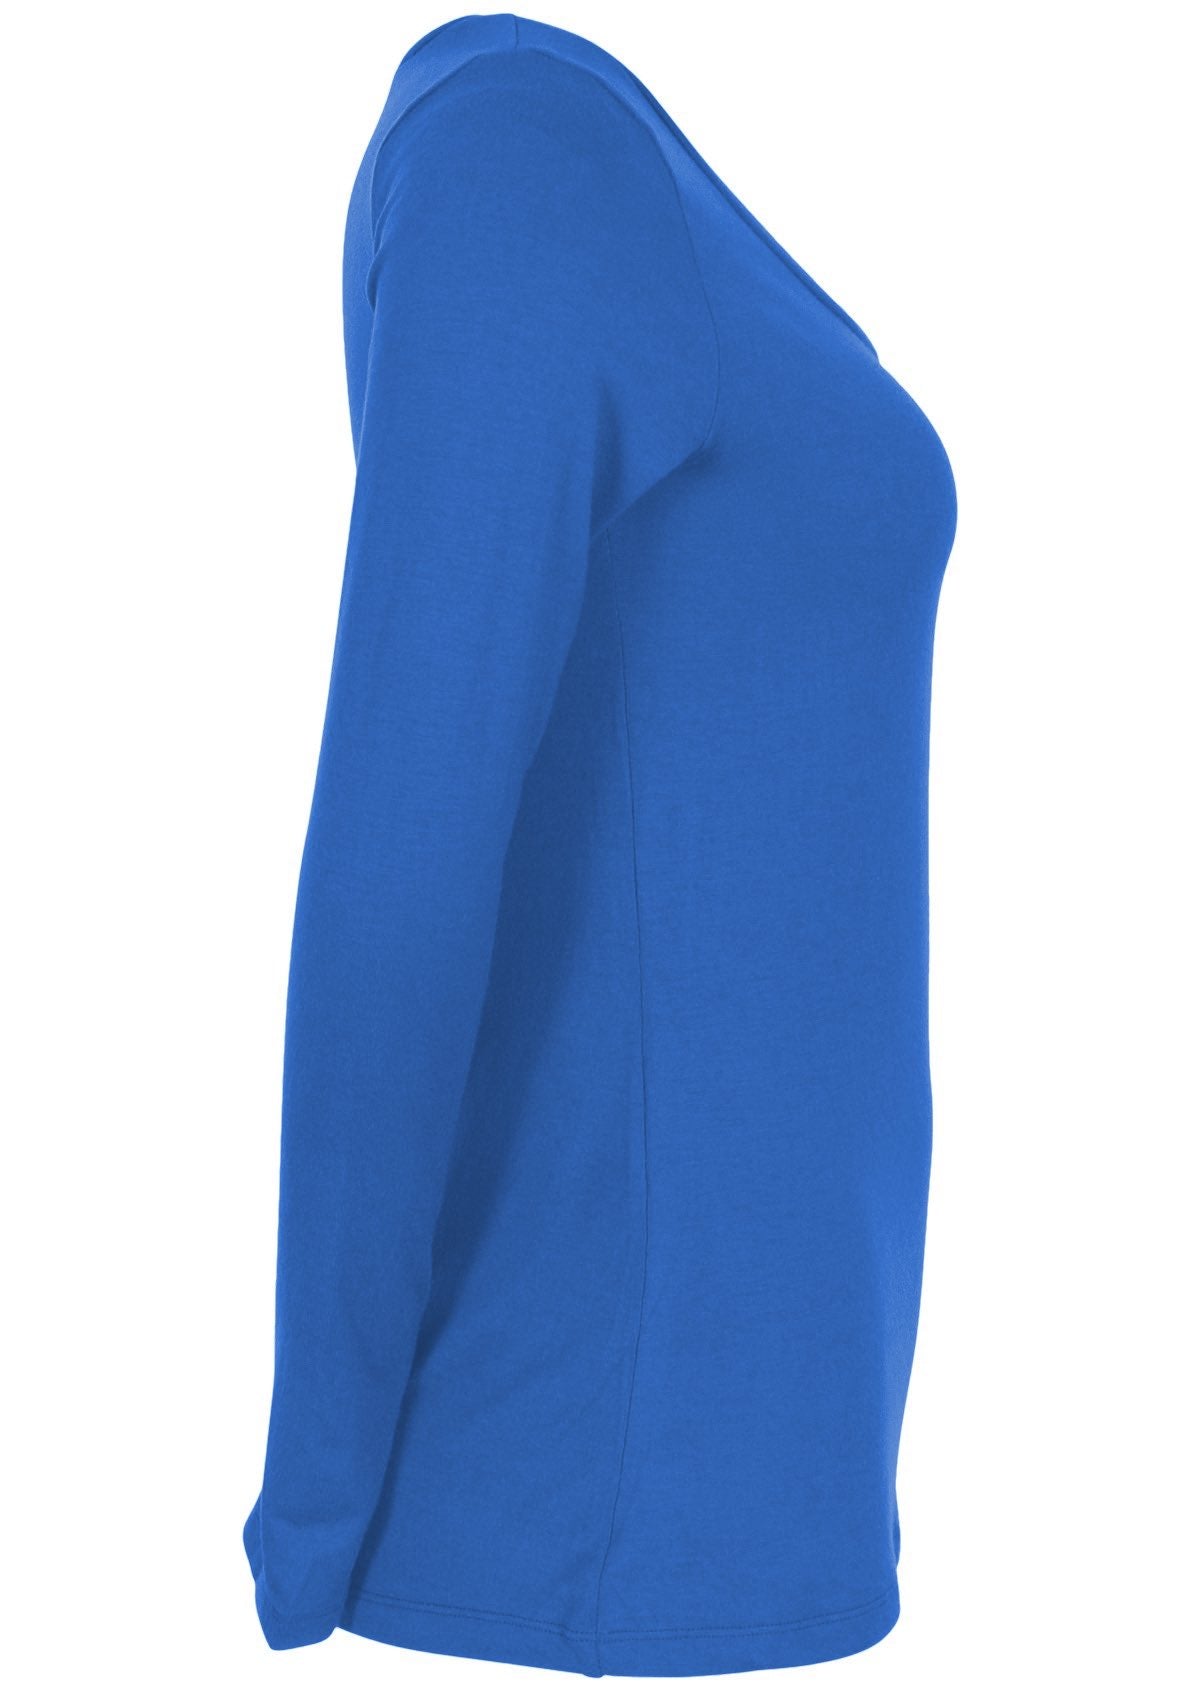 Side view of women's blue long sleeve stretch v-neck soft rayon top.